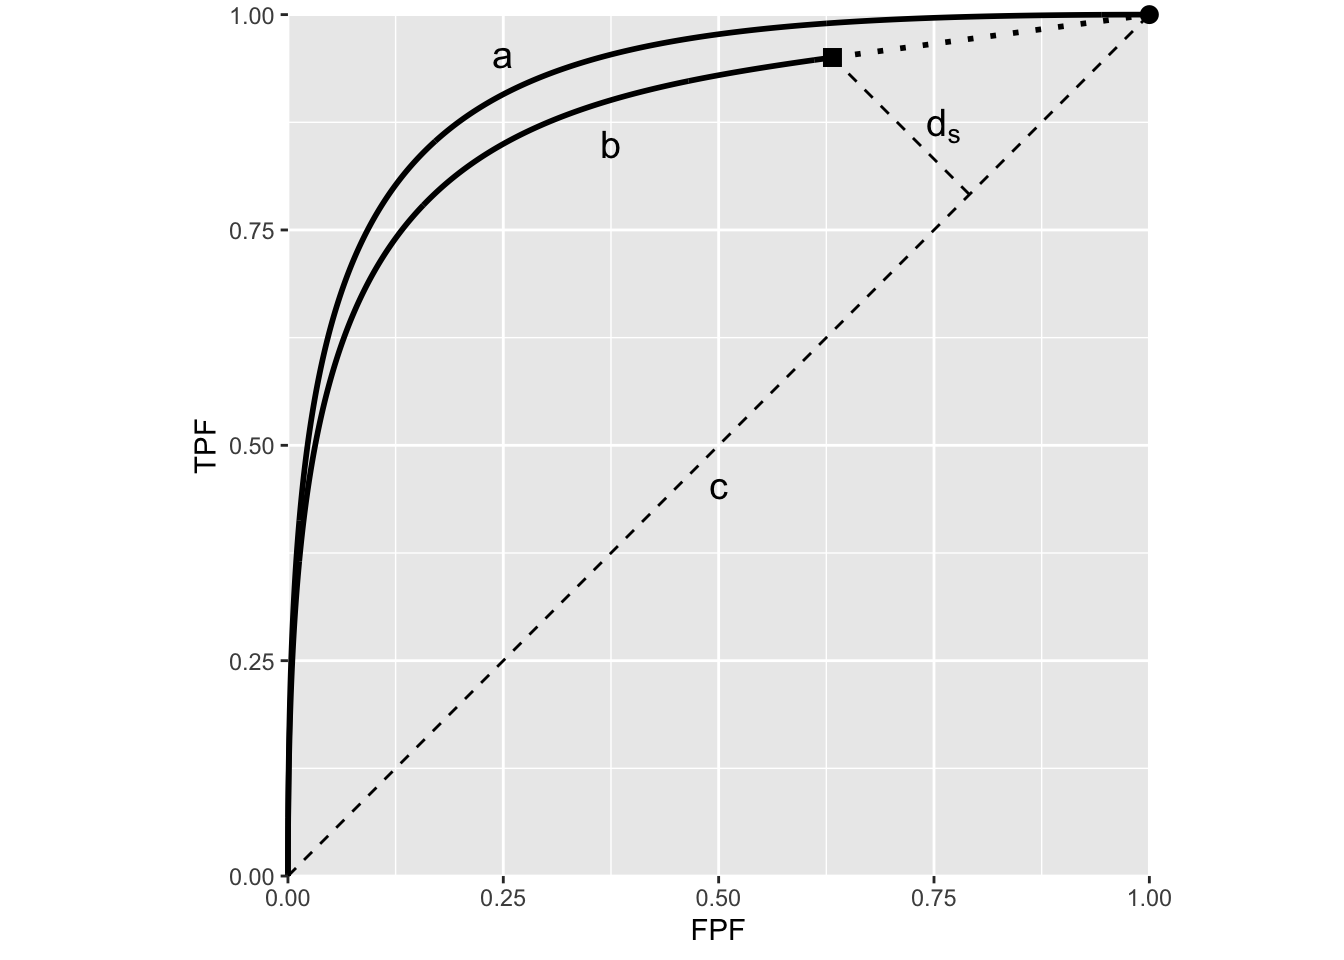 Relation of lesion-localization performance to the end-point of the ROC curve. Plot (a) is using the binormal model while plot (b) is using a RSM predicted curve. The chance diagonal is labeled c. The filled square is the end-point of the RSM predicted curve while the filled dot is the end-point of the binormal predicted curve. The distance of the filled square from the chance diagonal, labeled $d_S$, is a measure of lesion-localization performance.